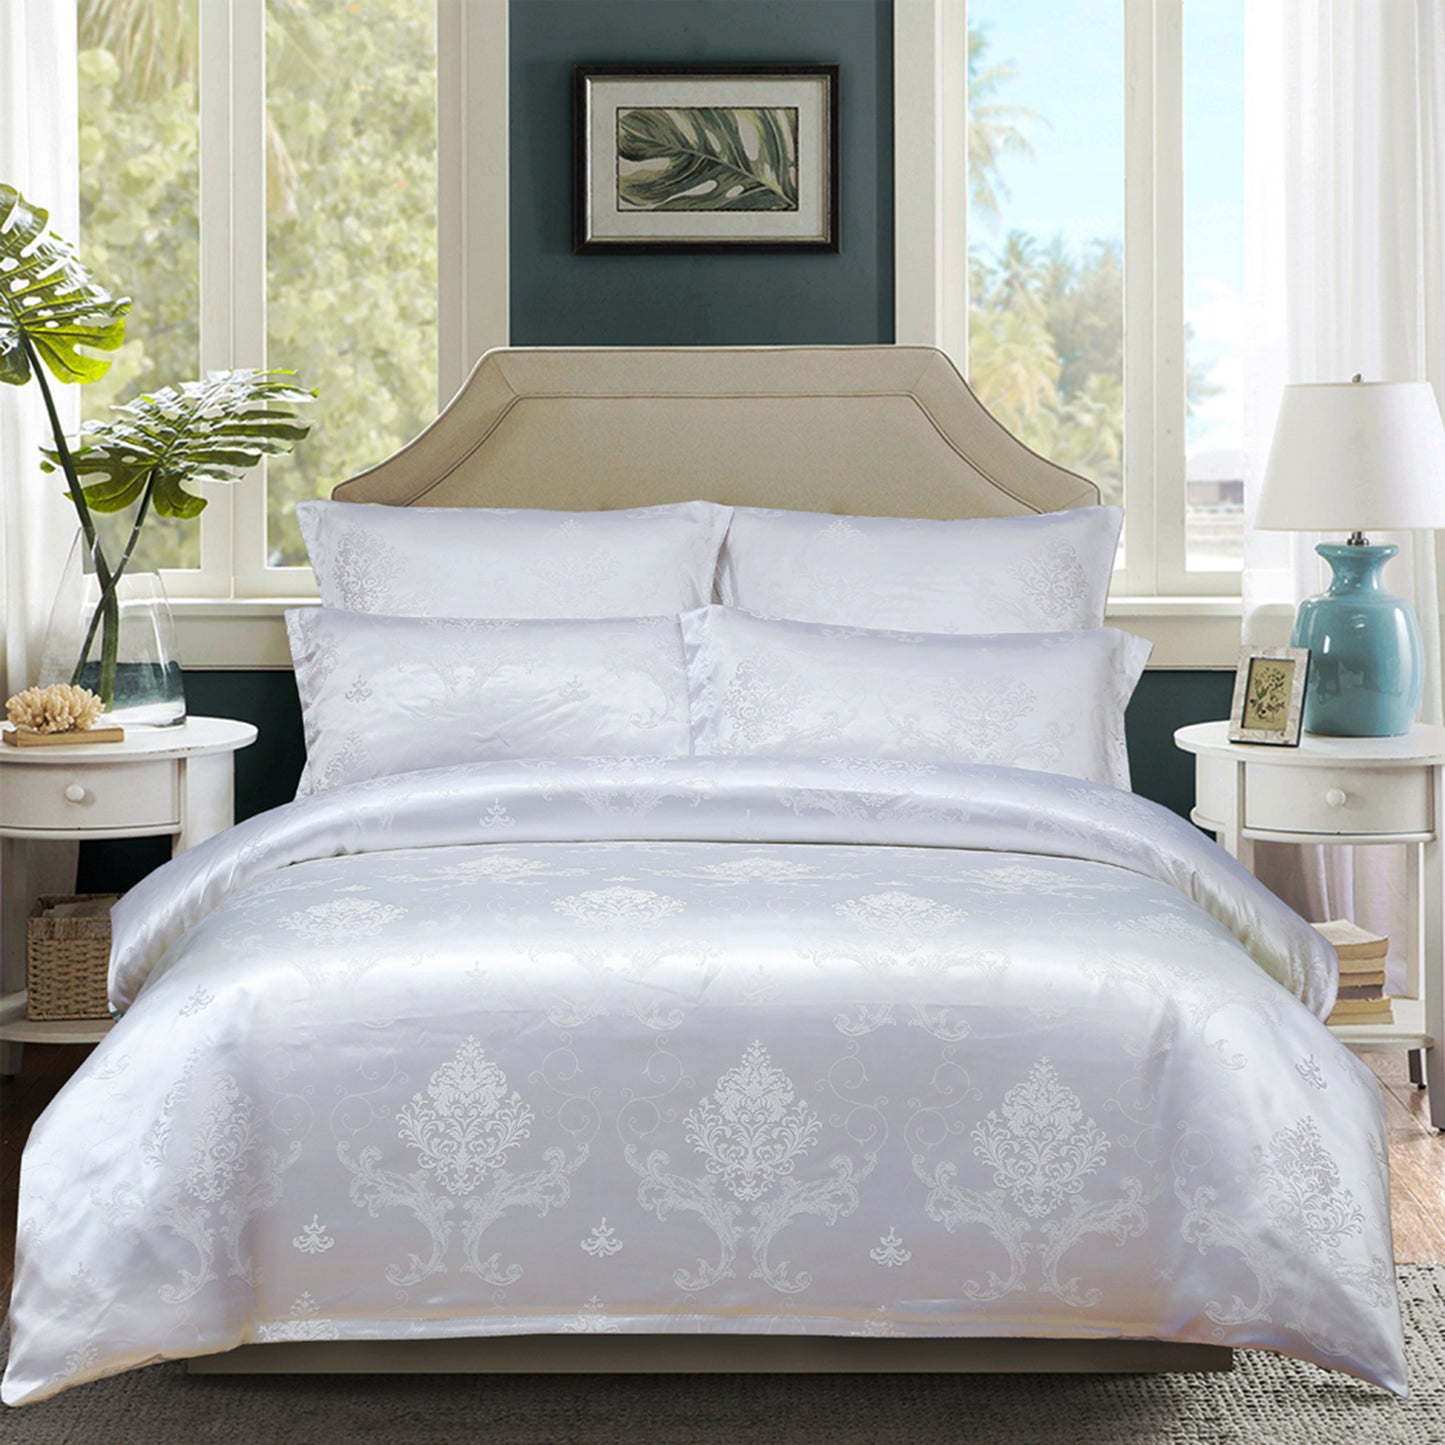 WONGS BEDDING White Embroidery Satin Craft Duvet Cover Set With 2 Pillow Case